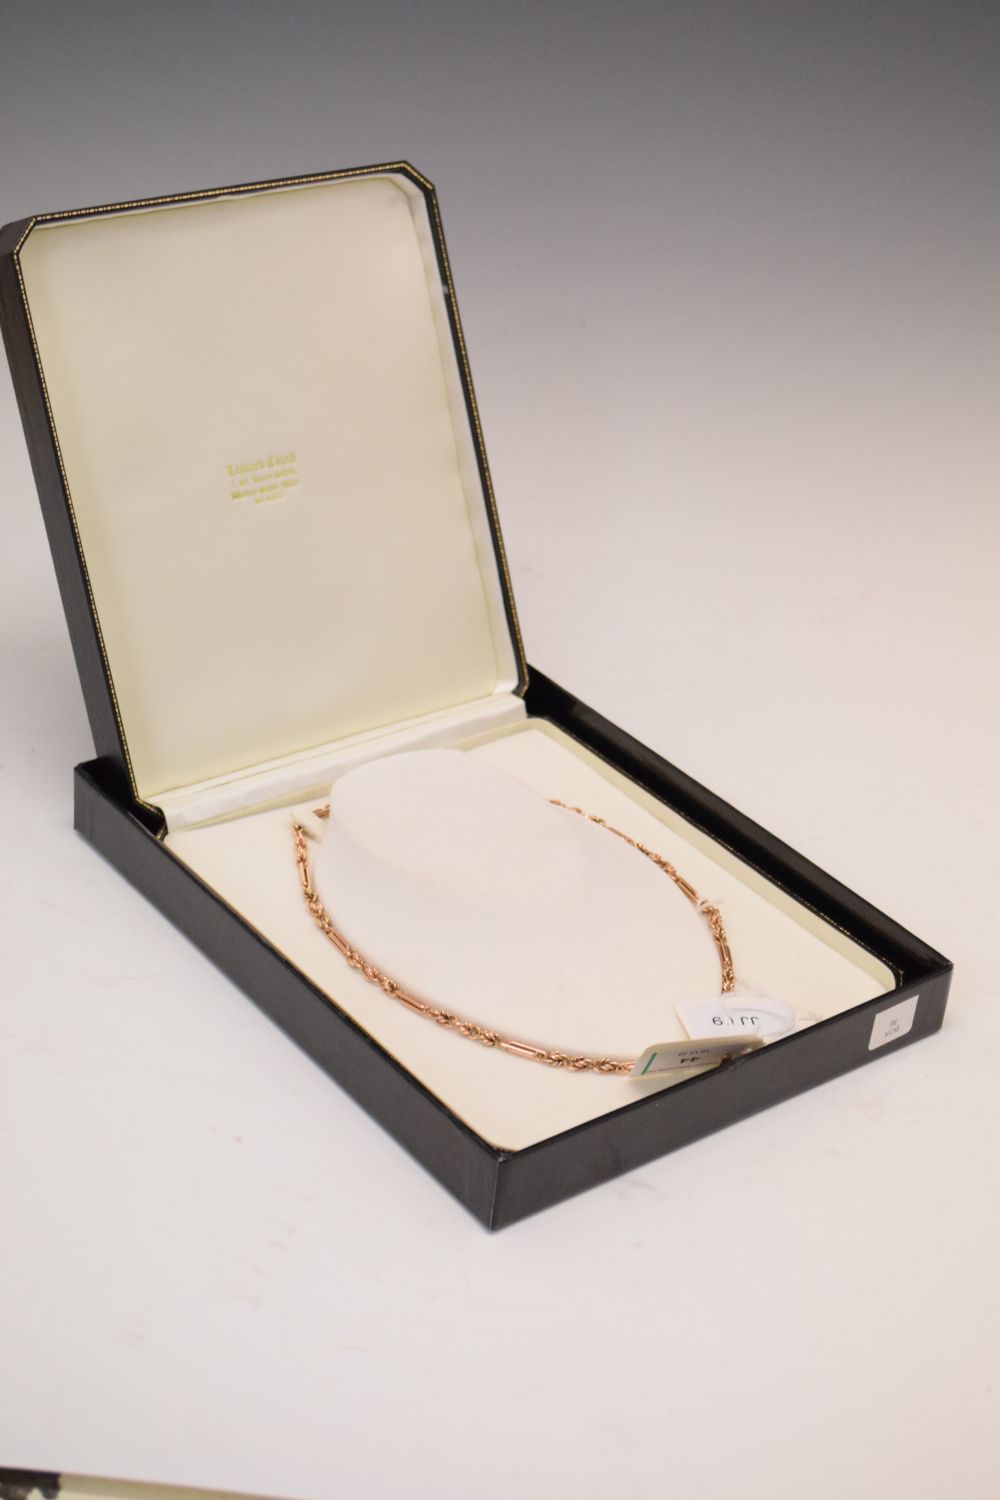 9 carat rose gold chain, the links in the style of an old watch albert, 57.5cm long, 42g gross, - Image 7 of 7